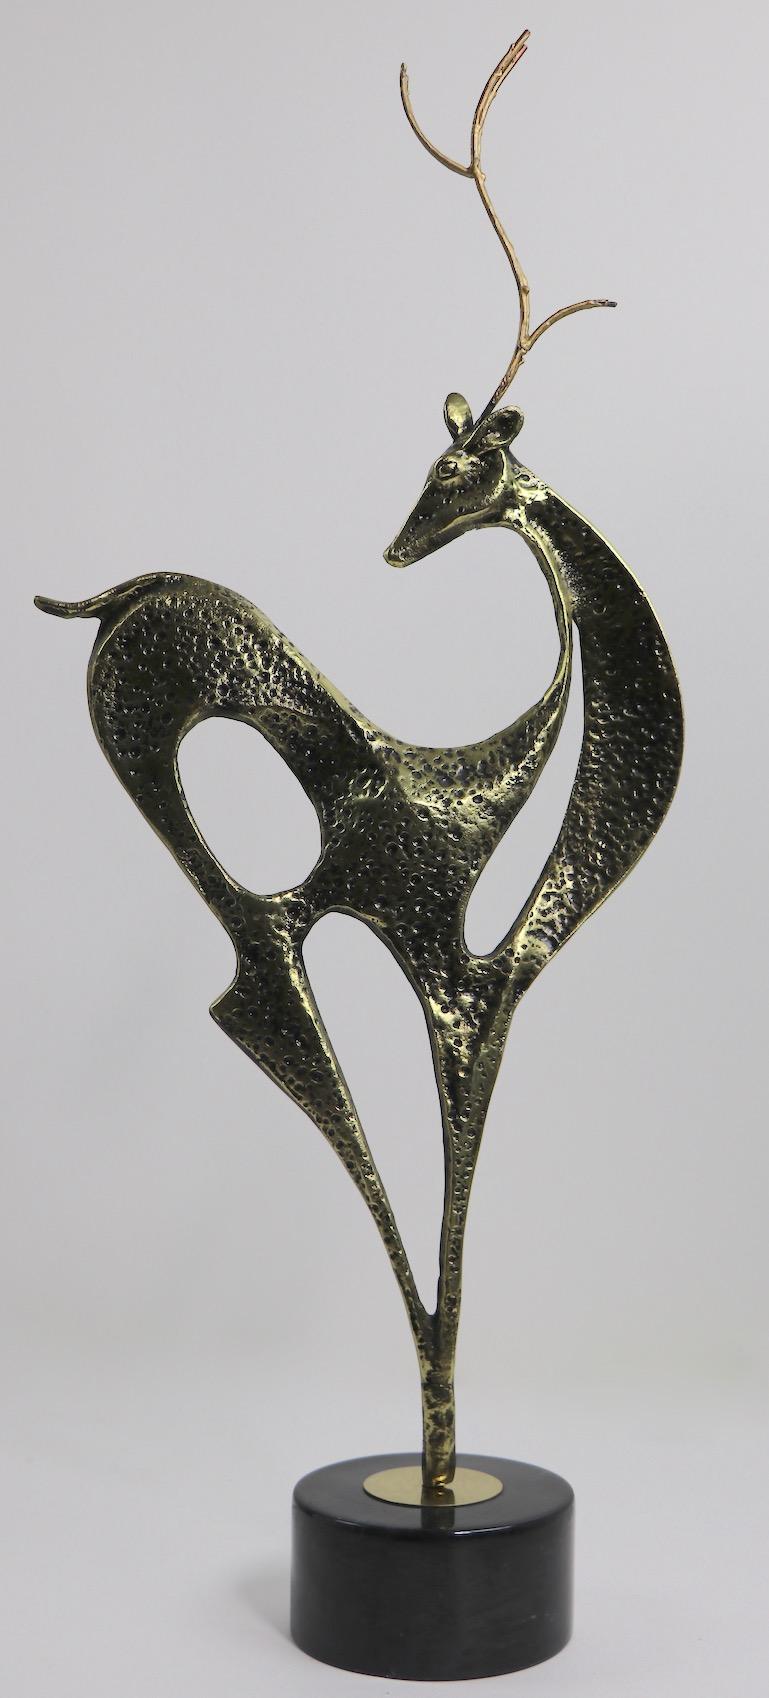 Brutalist School sculpture of stylized deer, circa 1980s, by Jere. Solid cast brass on black marble plinth base. Measures: Base 6 inch diameter x 3 inch height. Very good, original condition, unsigned.